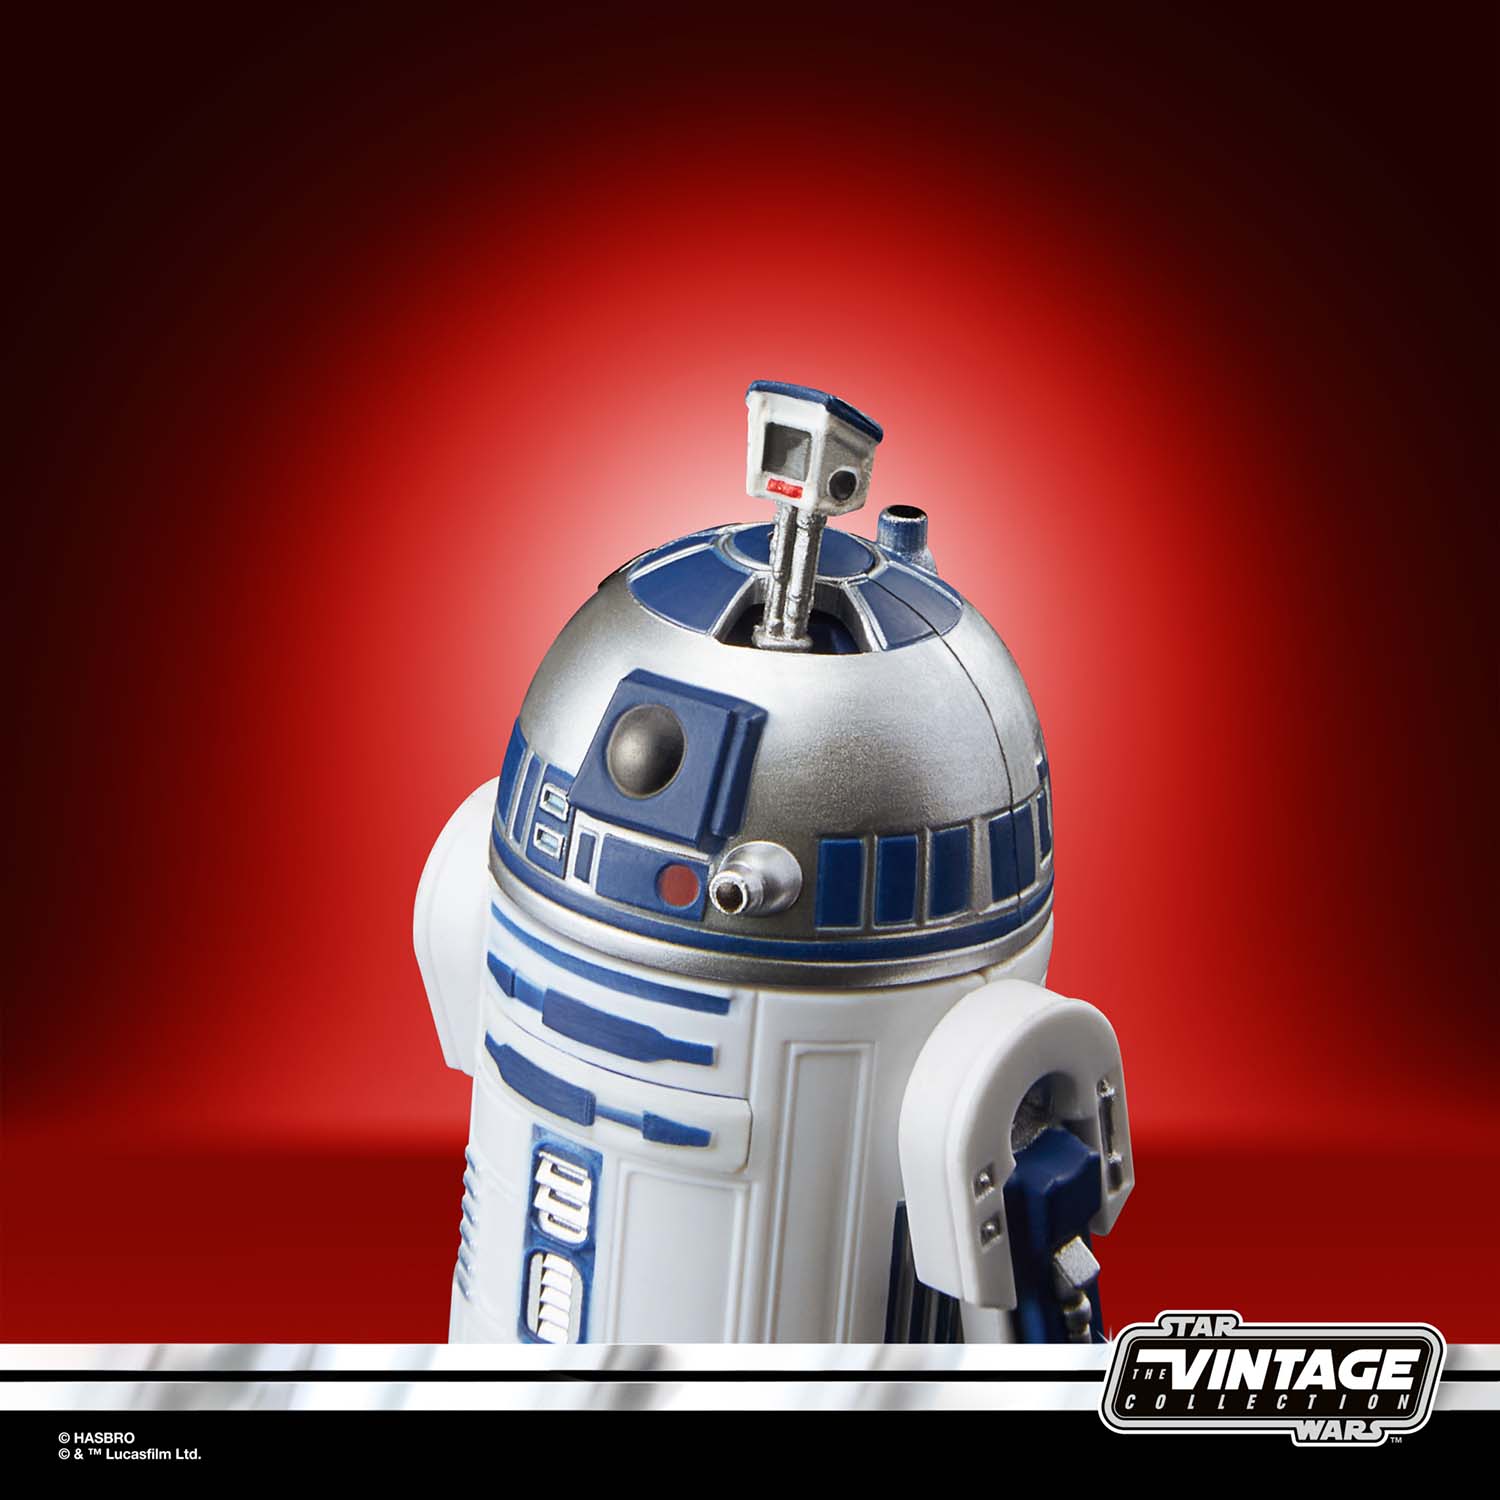 Star Wars Fan Celebration Exclusive Reveal: TVC R2-D2 and Imperial